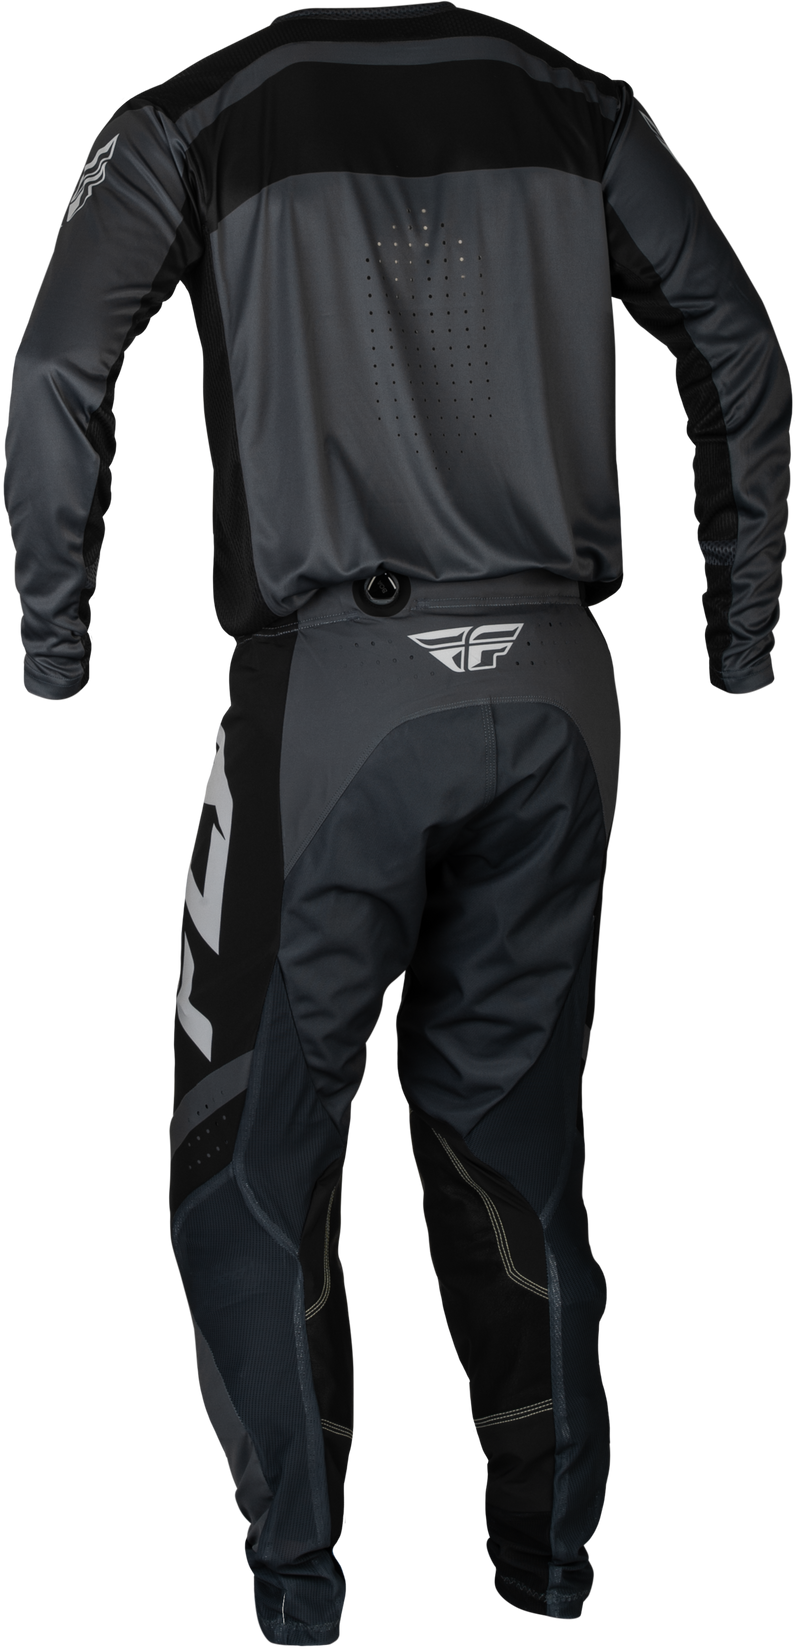 FLY Racing Lite Adult Moto Gear Set - Pant and Jersey Combo